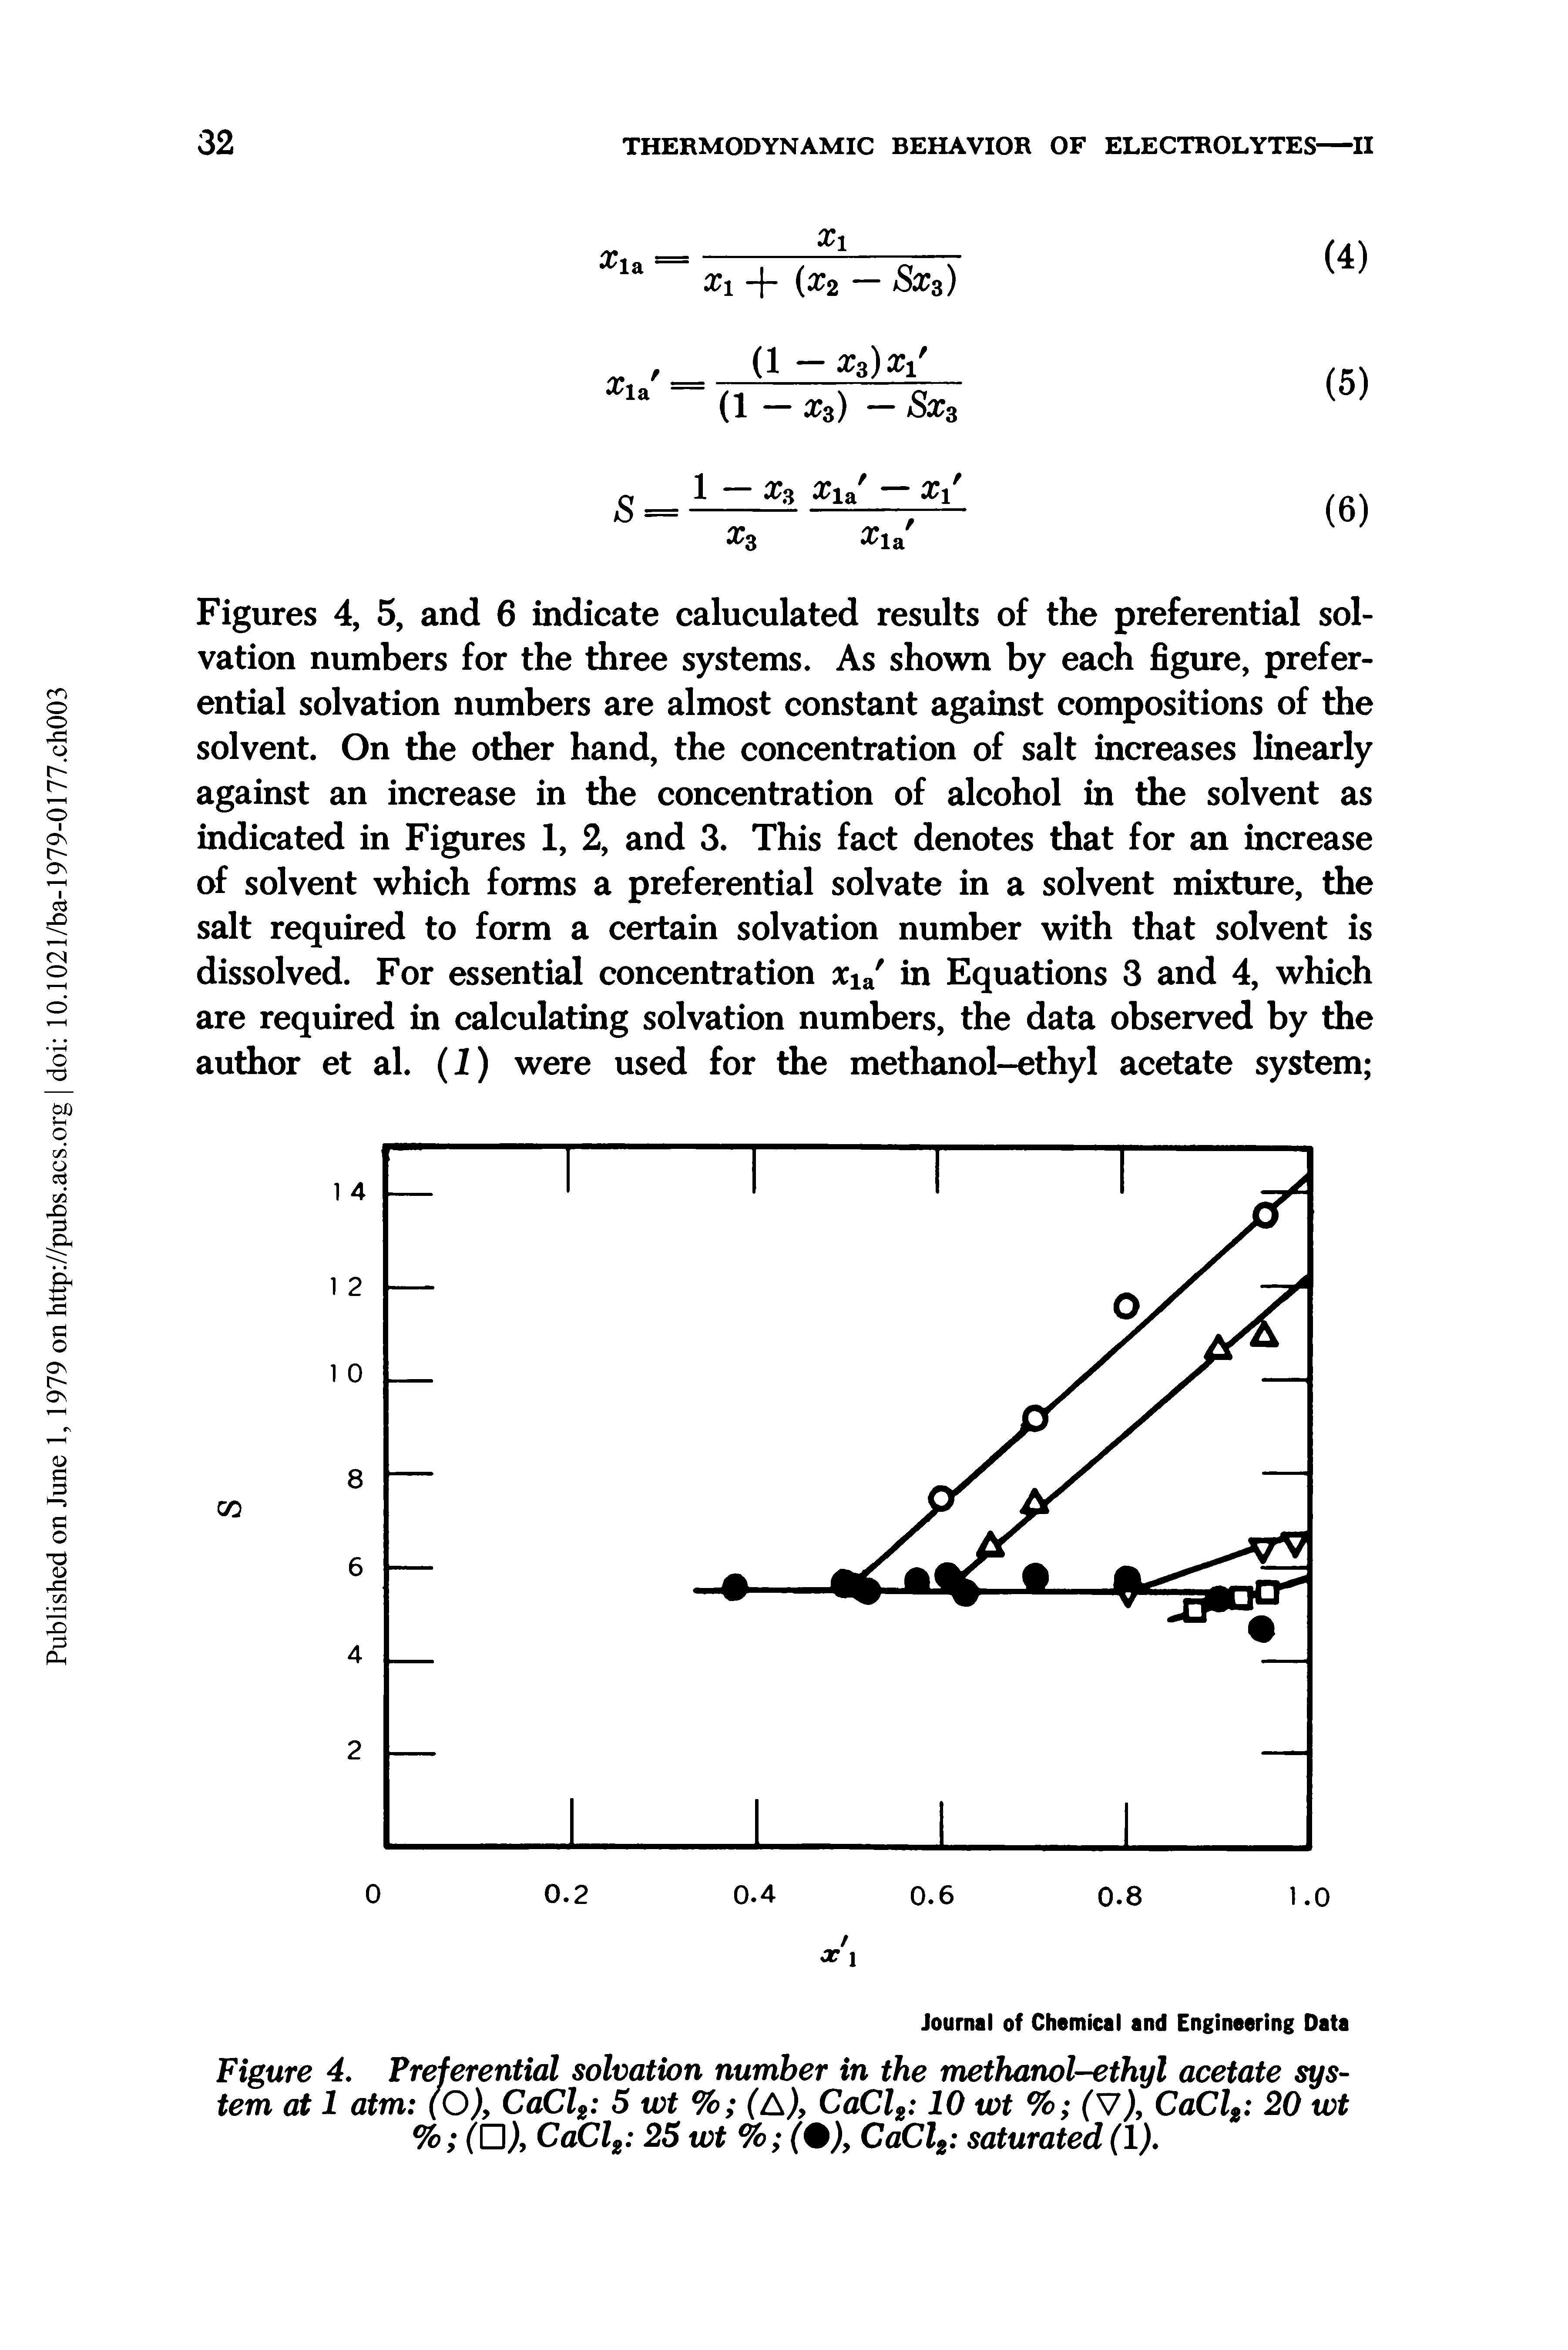 Figures 4, 5, and 6 indicate caluculated results of the preferential solvation numbers for the three systems. As shown by each figure, preferential solvation numbers are almost constant against compositions of the solvent. On the other hand, the concentration of salt increases linearly against an increase in the concentration of alcohol in the solvent as indicated in Figures 1, 2, and 3. This fact denotes that for an increase of solvent which forms a preferential solvate in a solvent mixture, the salt required to form a certain solvation number with that solvent is dissolved. For essential concentration x1SL in Equations 3 and 4, which are required in calculating solvation numbers, the data observed by the author et al. (I) were used for the methanol-ethyl acetate system ...